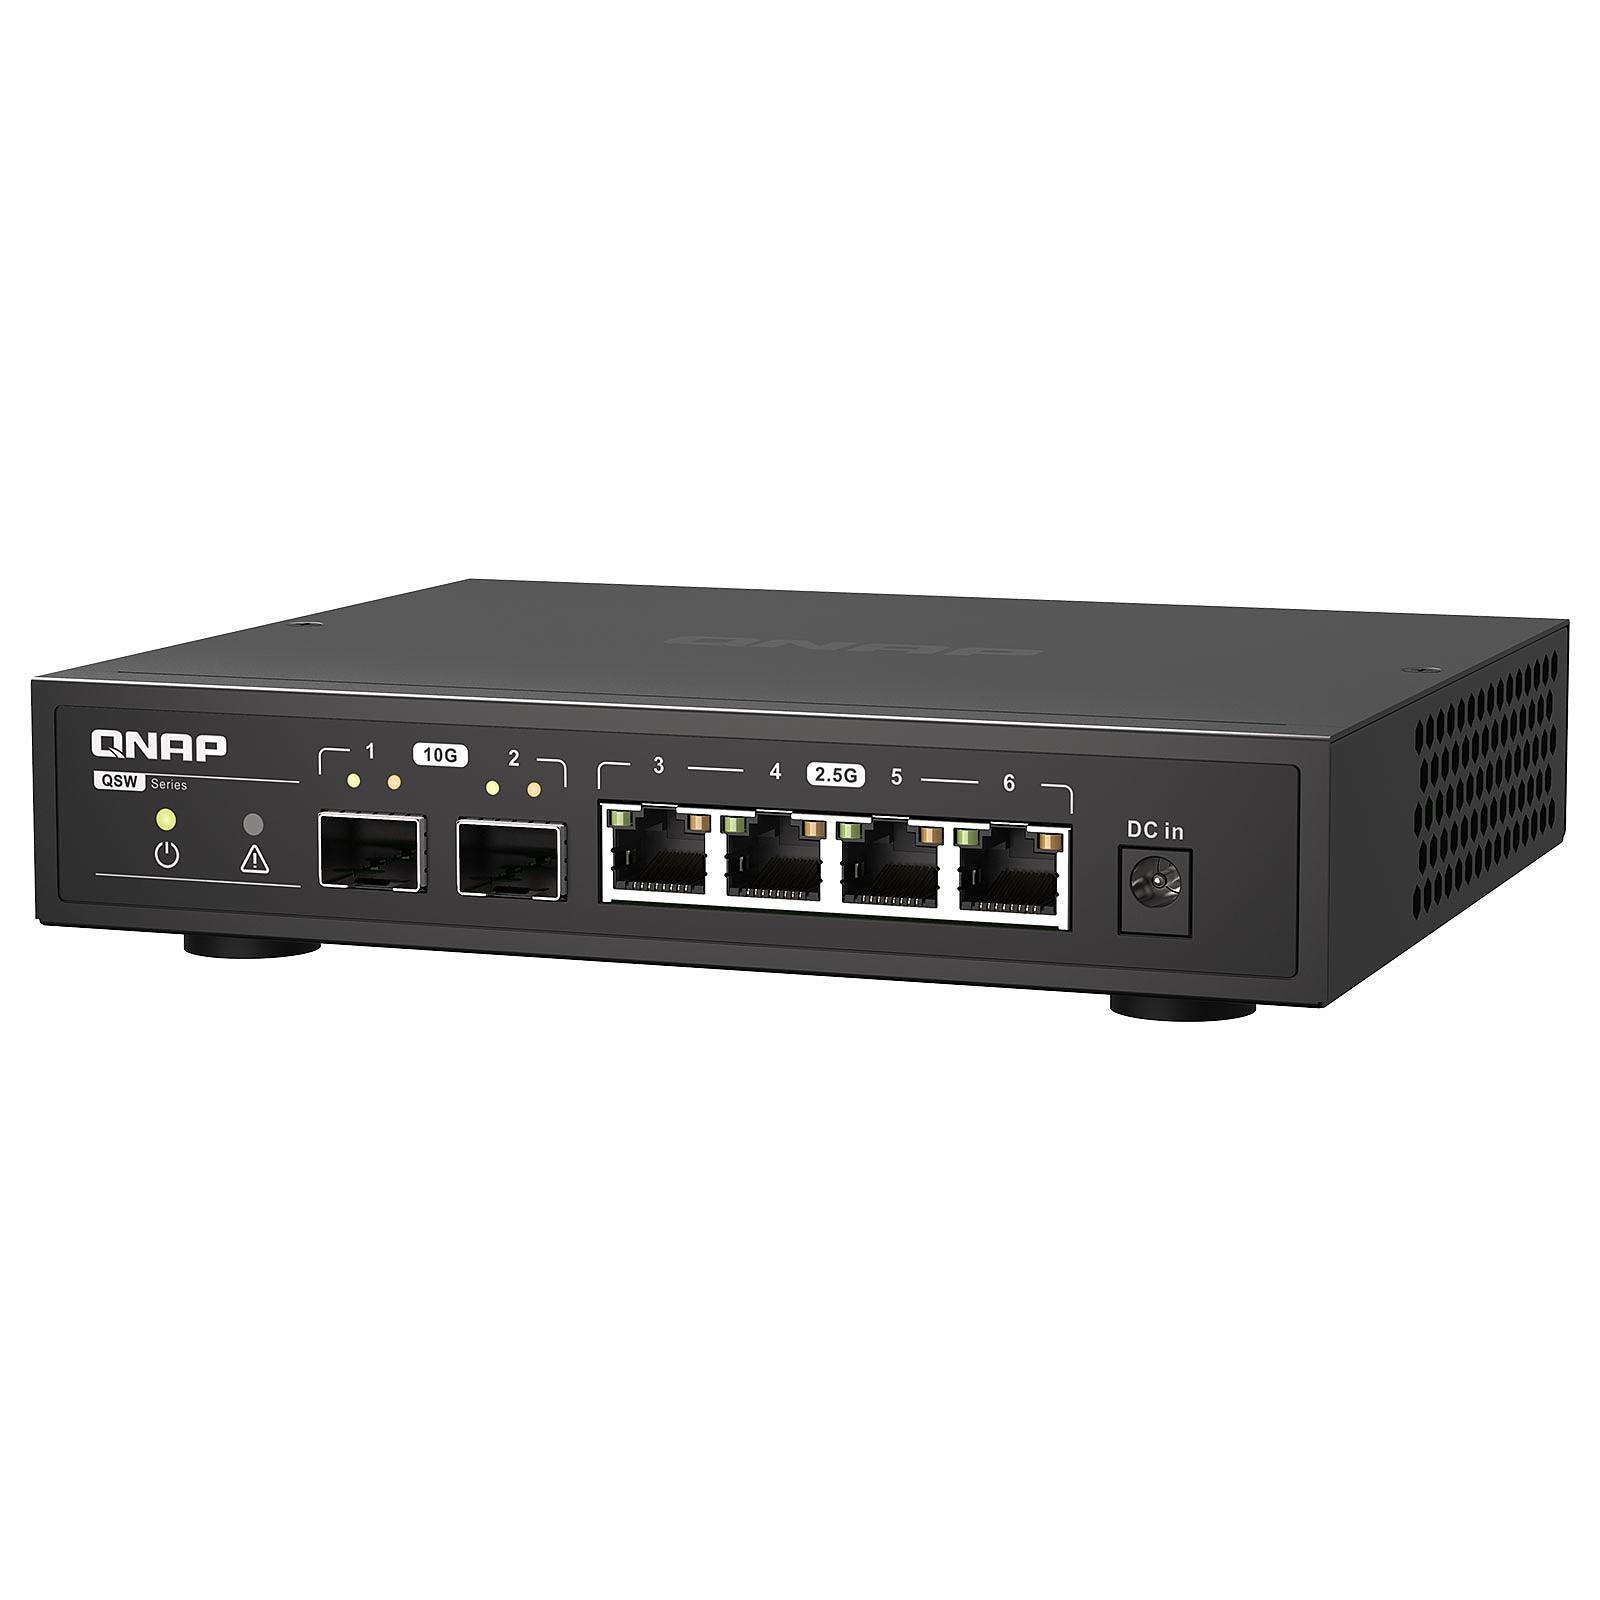 QNAP QSW-2104-2S Network Switch